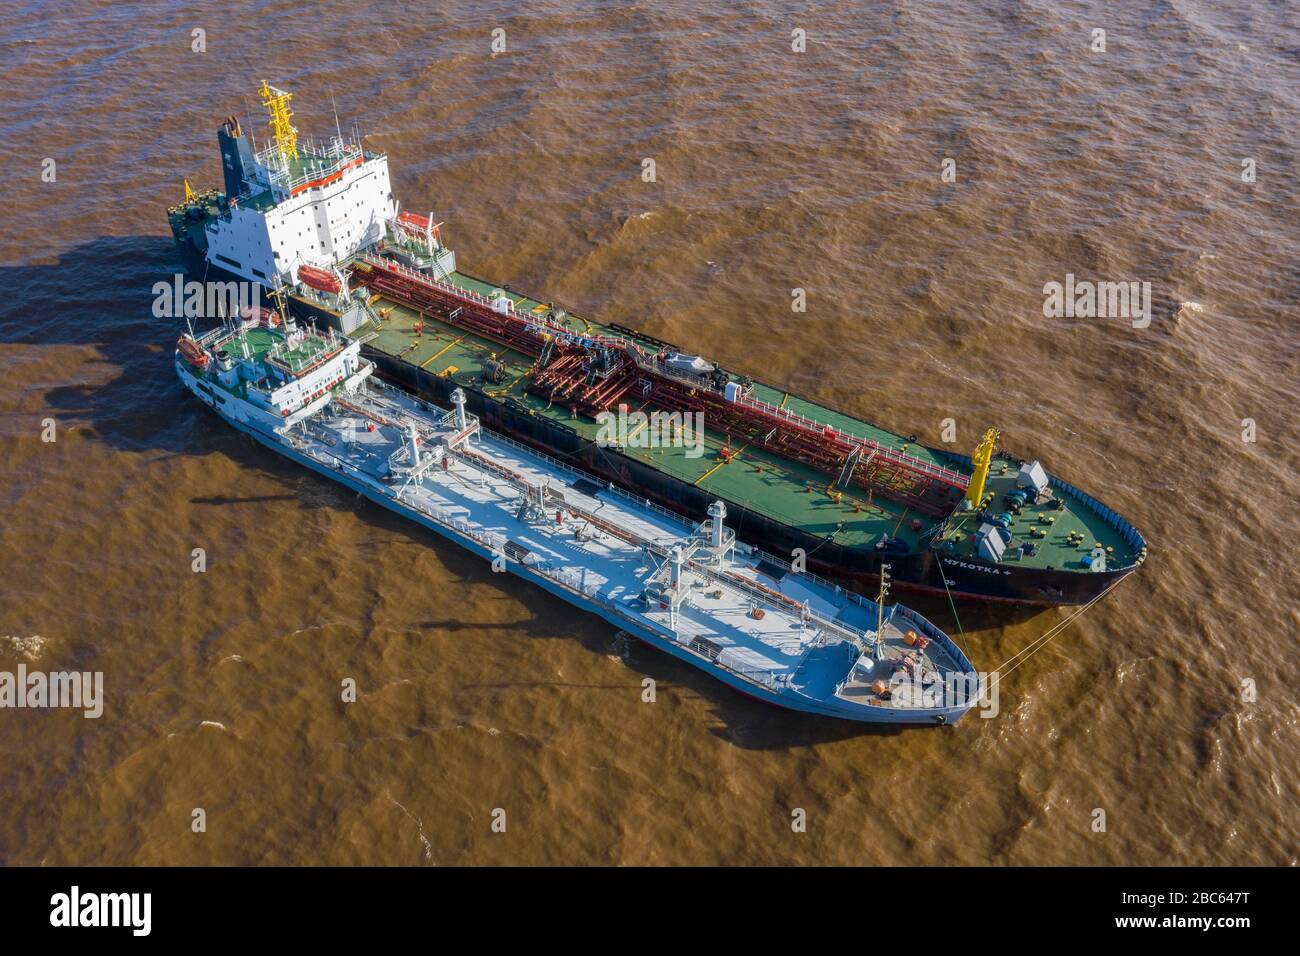 The tankers Chukotka + and Lenaneft 2033 are moored to each other, overload oil products. Stock Photo